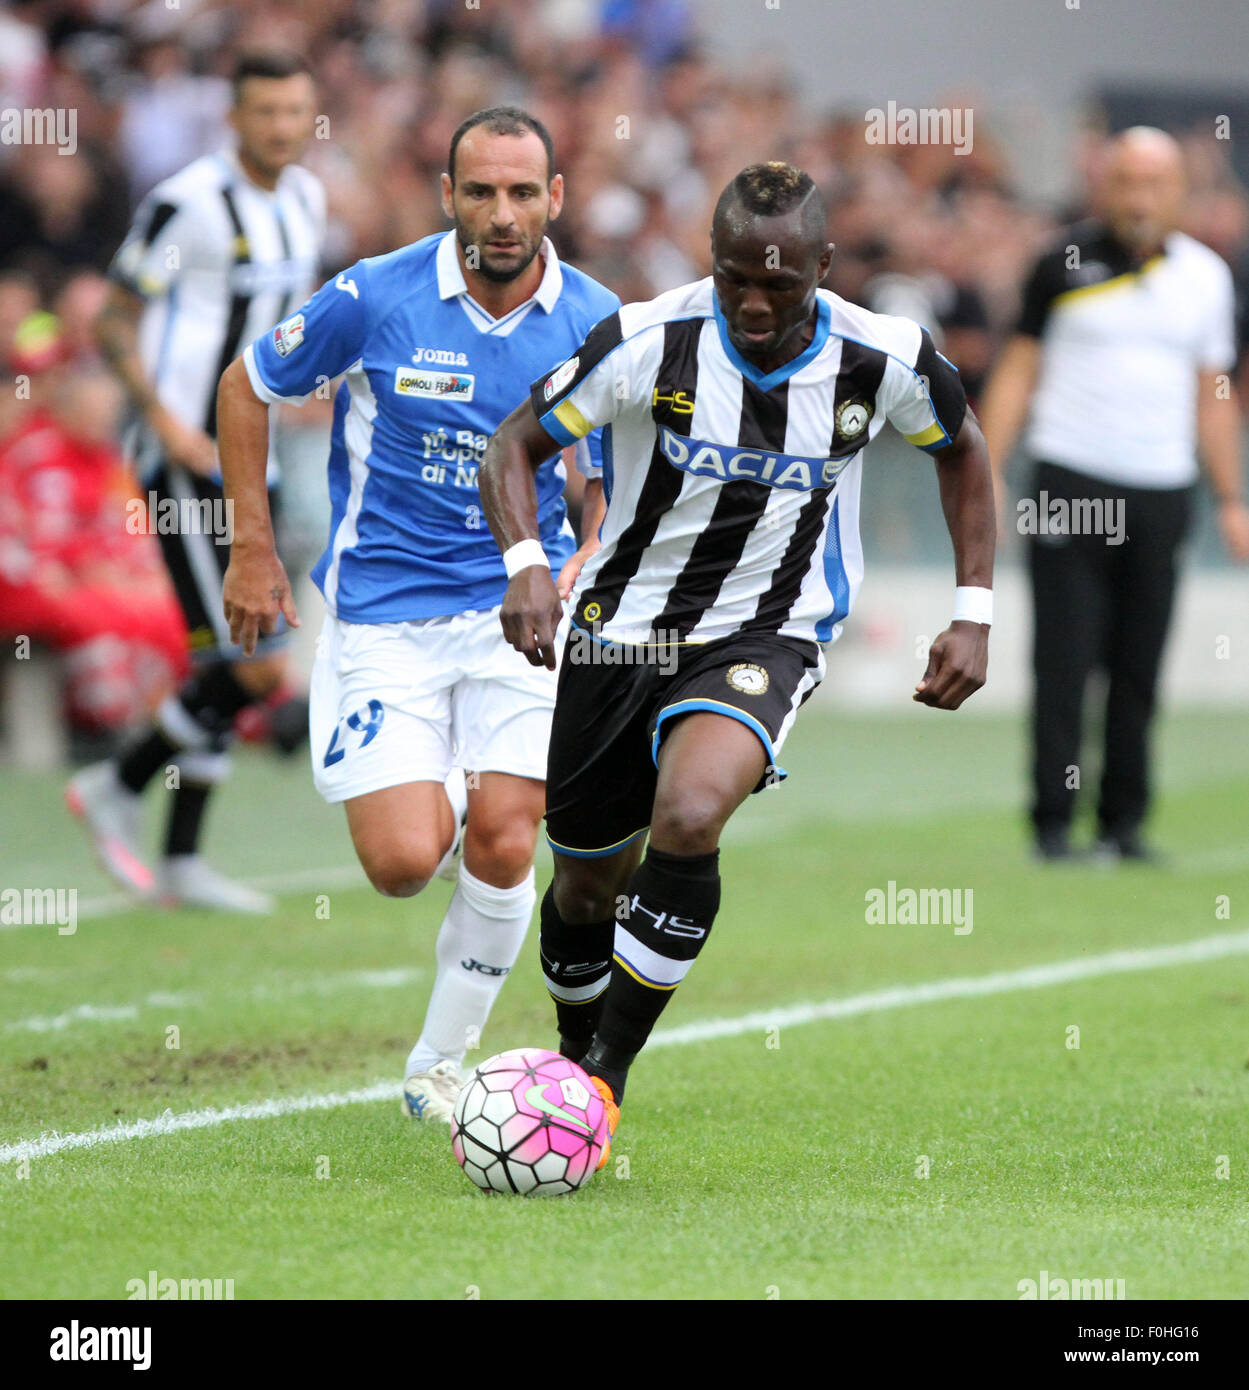 Udine, Italy. 16th August, 2015. Udinese's midfielder Emmanuel Agyemang Badu during the Tim Cup 2015-16 football match Udinese Calcio v Novara Calcio on 16th August, 2015 at Friuli Stadium in Udine, Italy. Credit:  Andrea Spinelli/Alamy Live News Stock Photo